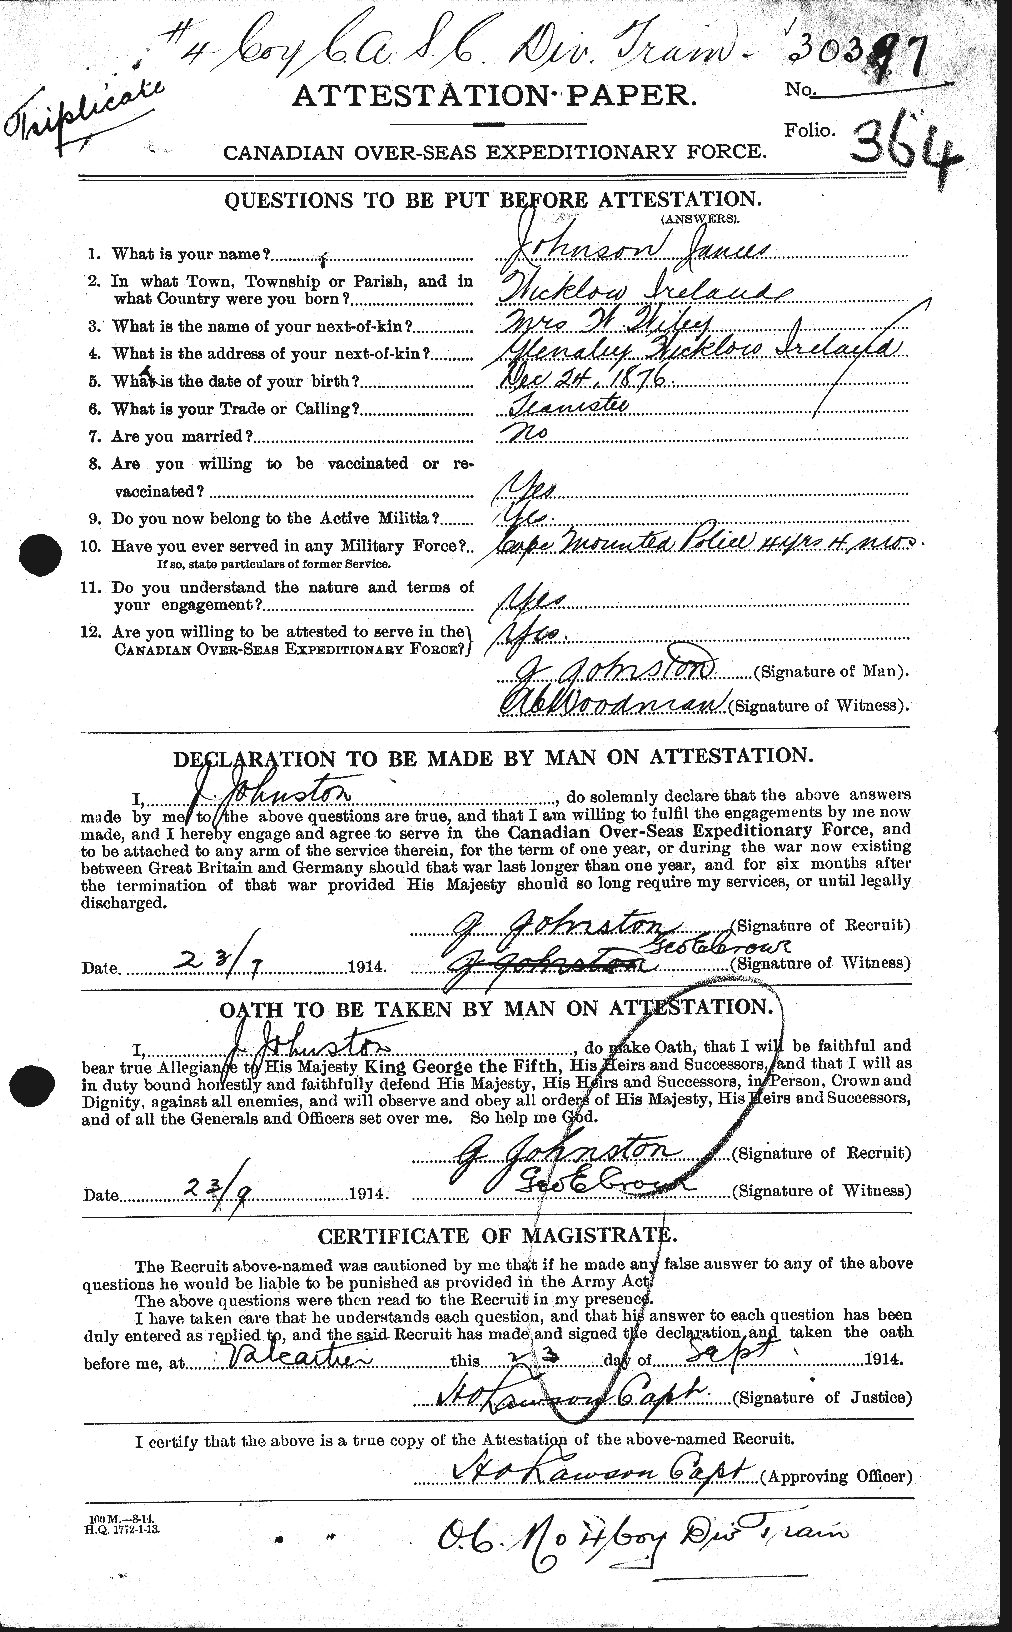 Personnel Records of the First World War - CEF 420605a